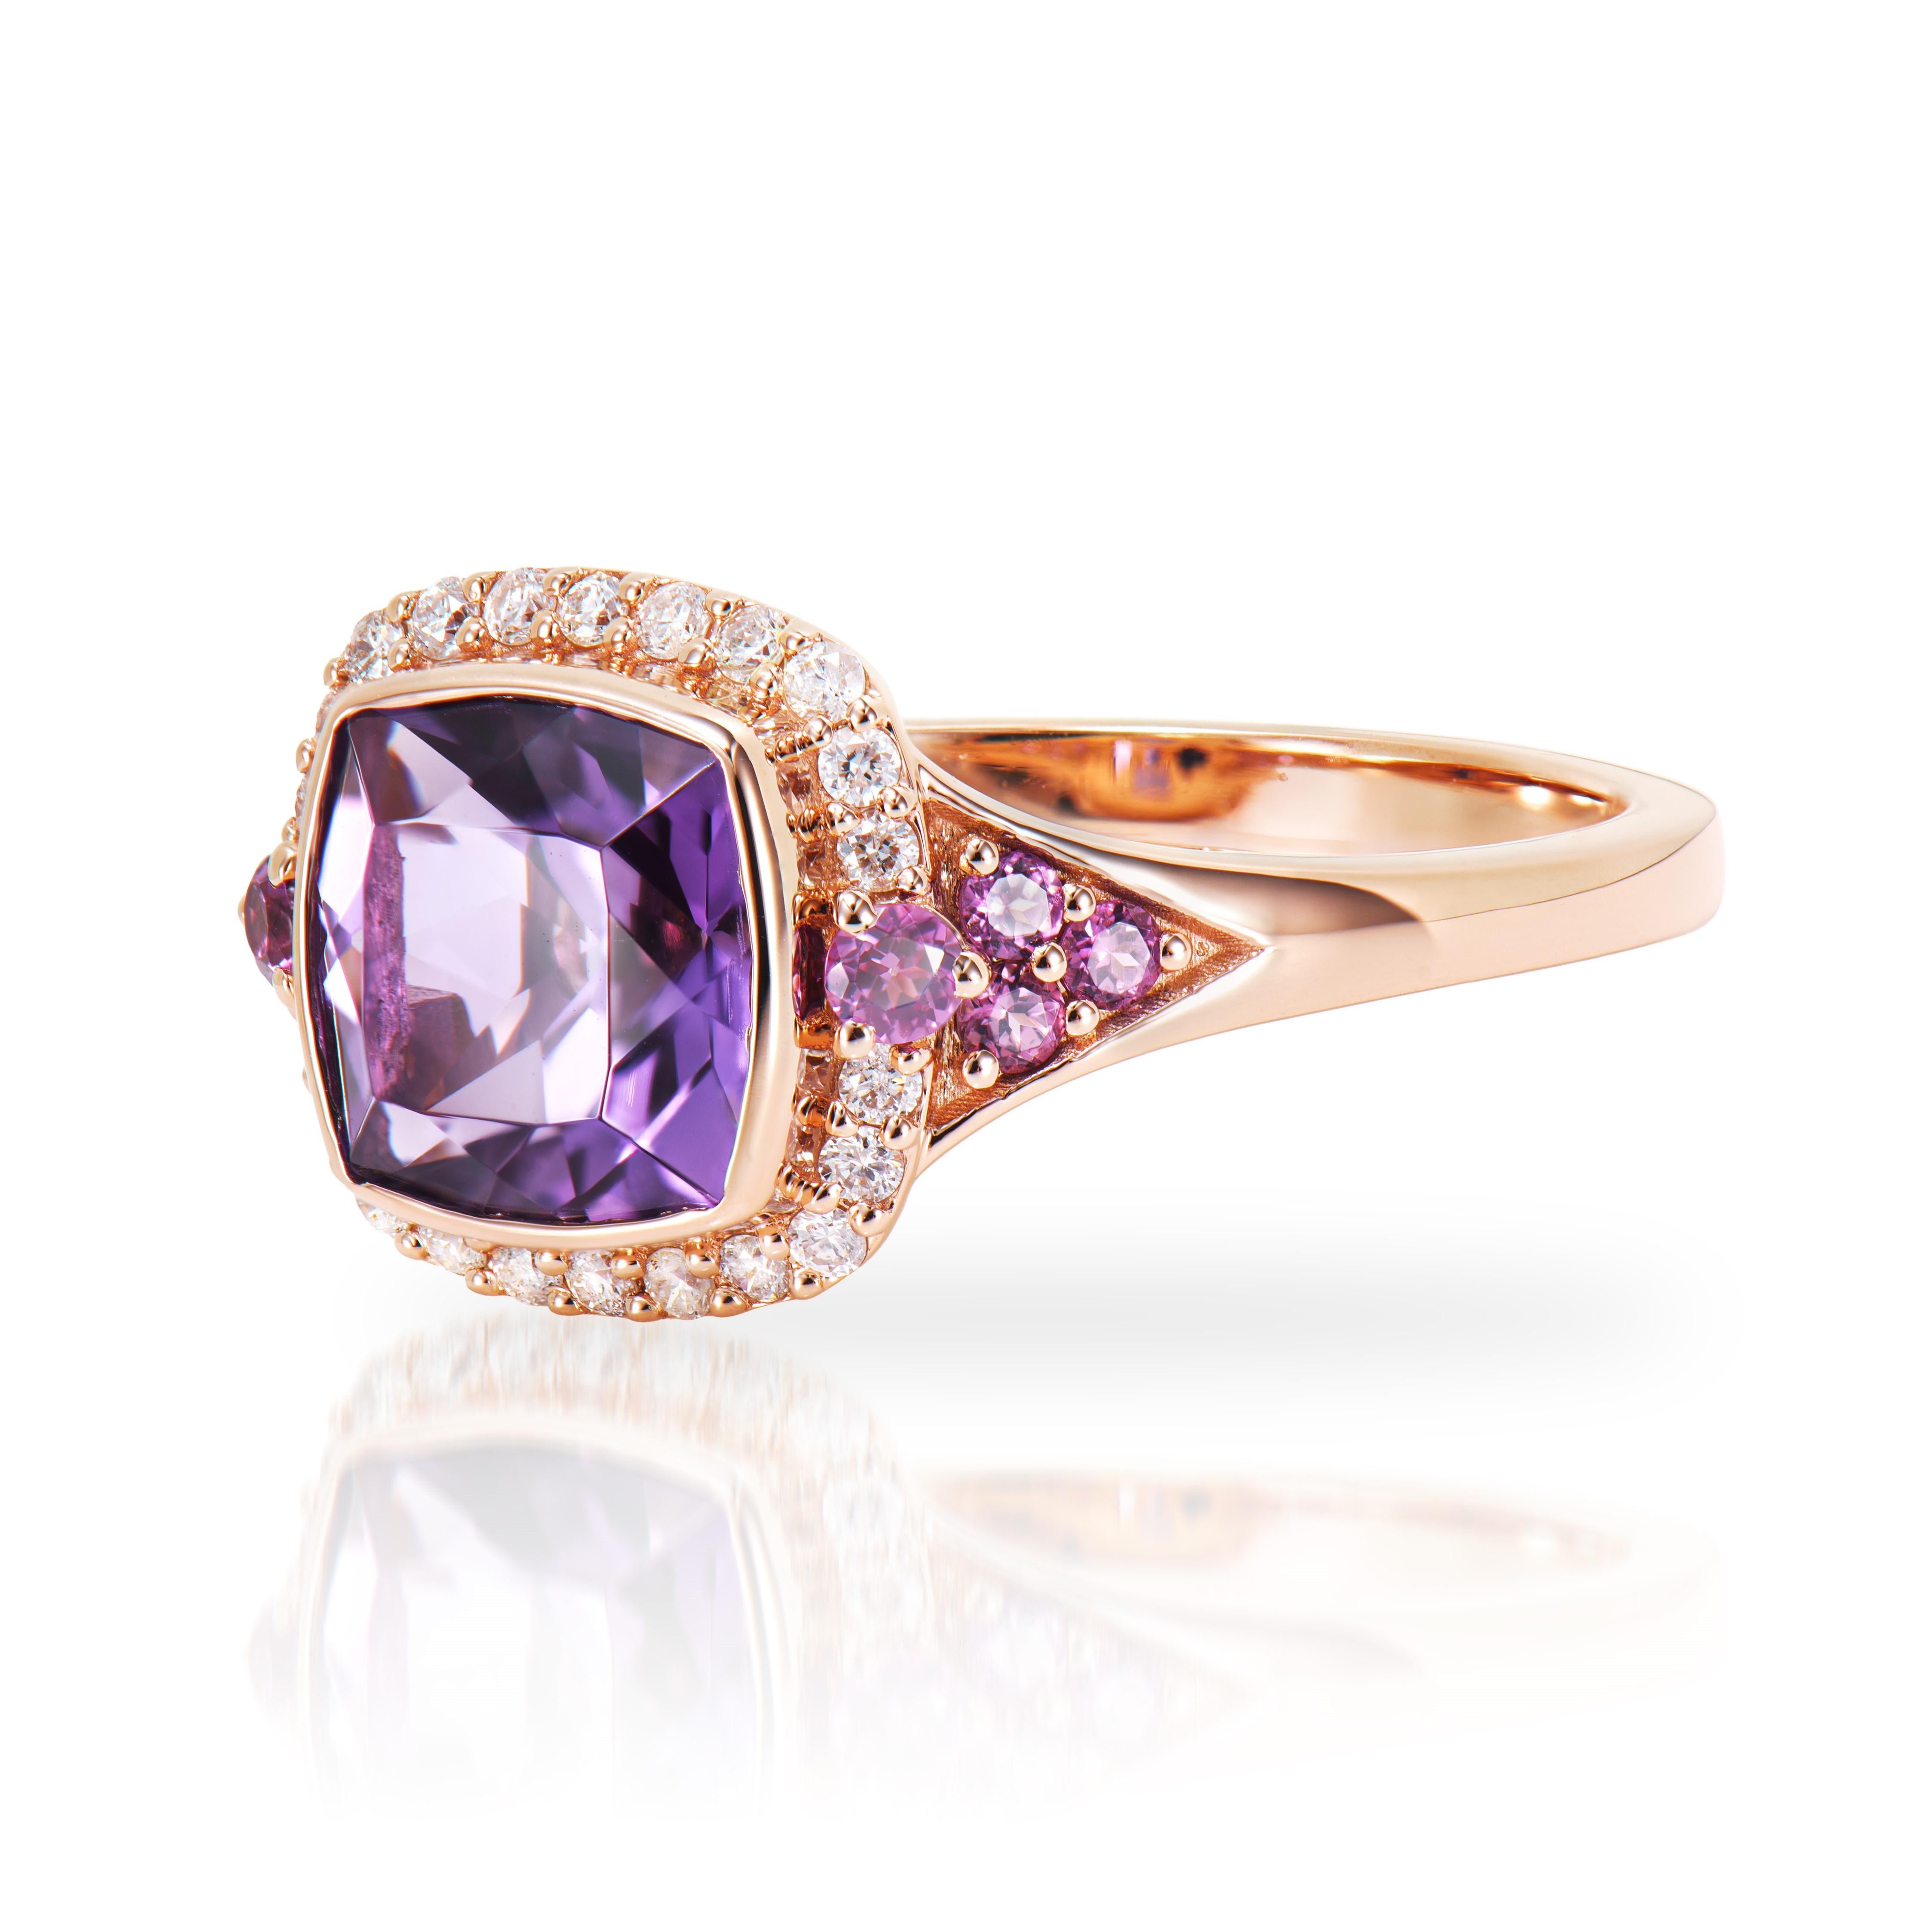 Cushion Cut 1.22 Carat Amethyst Fancy Ring in 14KRG with Rhodolite and White Diamond.   For Sale